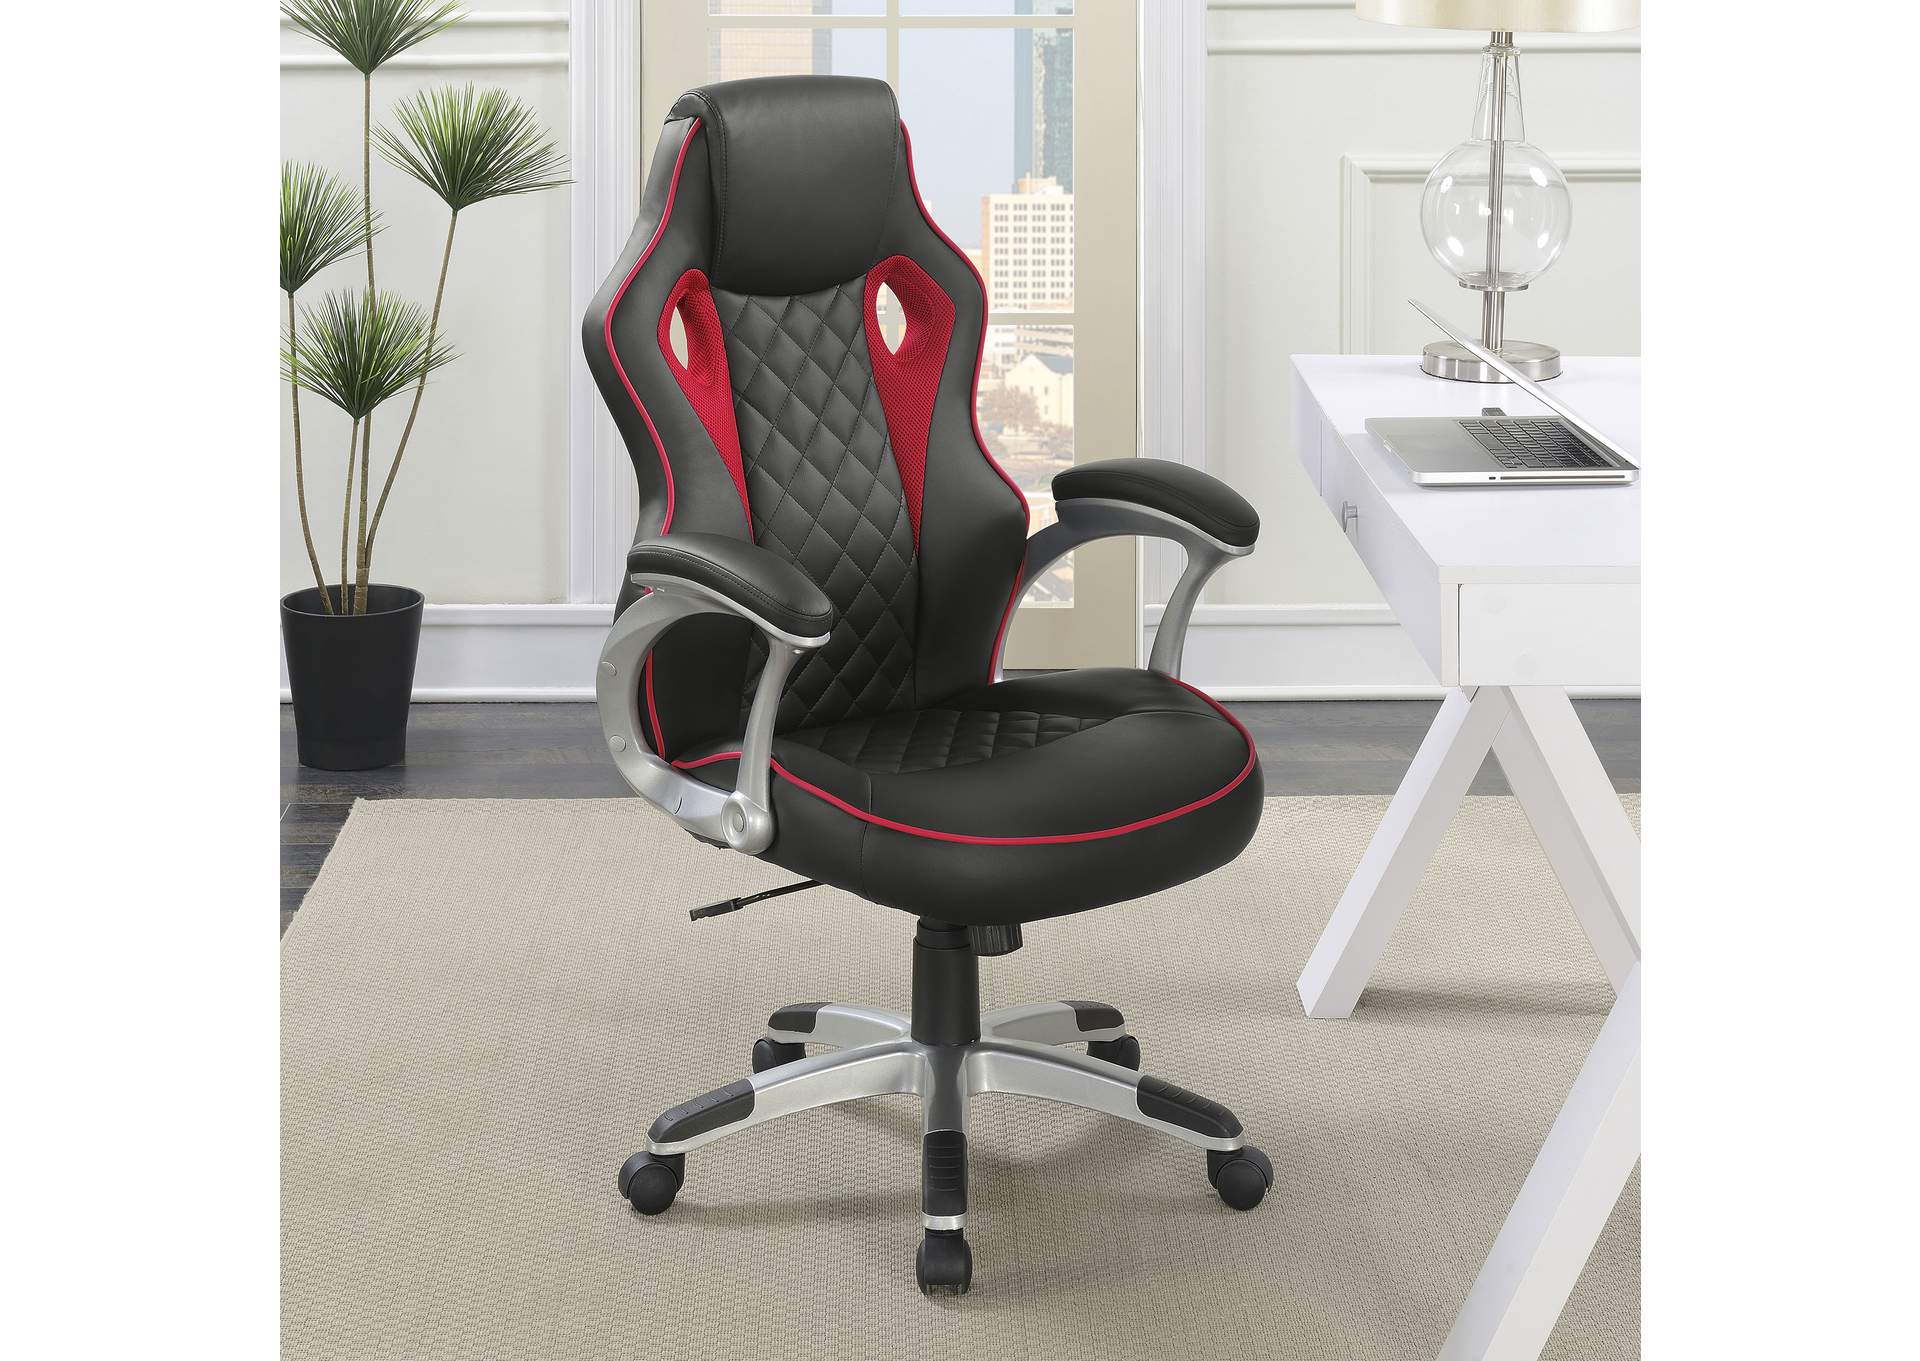 Lucas Upholstered Office Chair Black and Red,Coaster Furniture